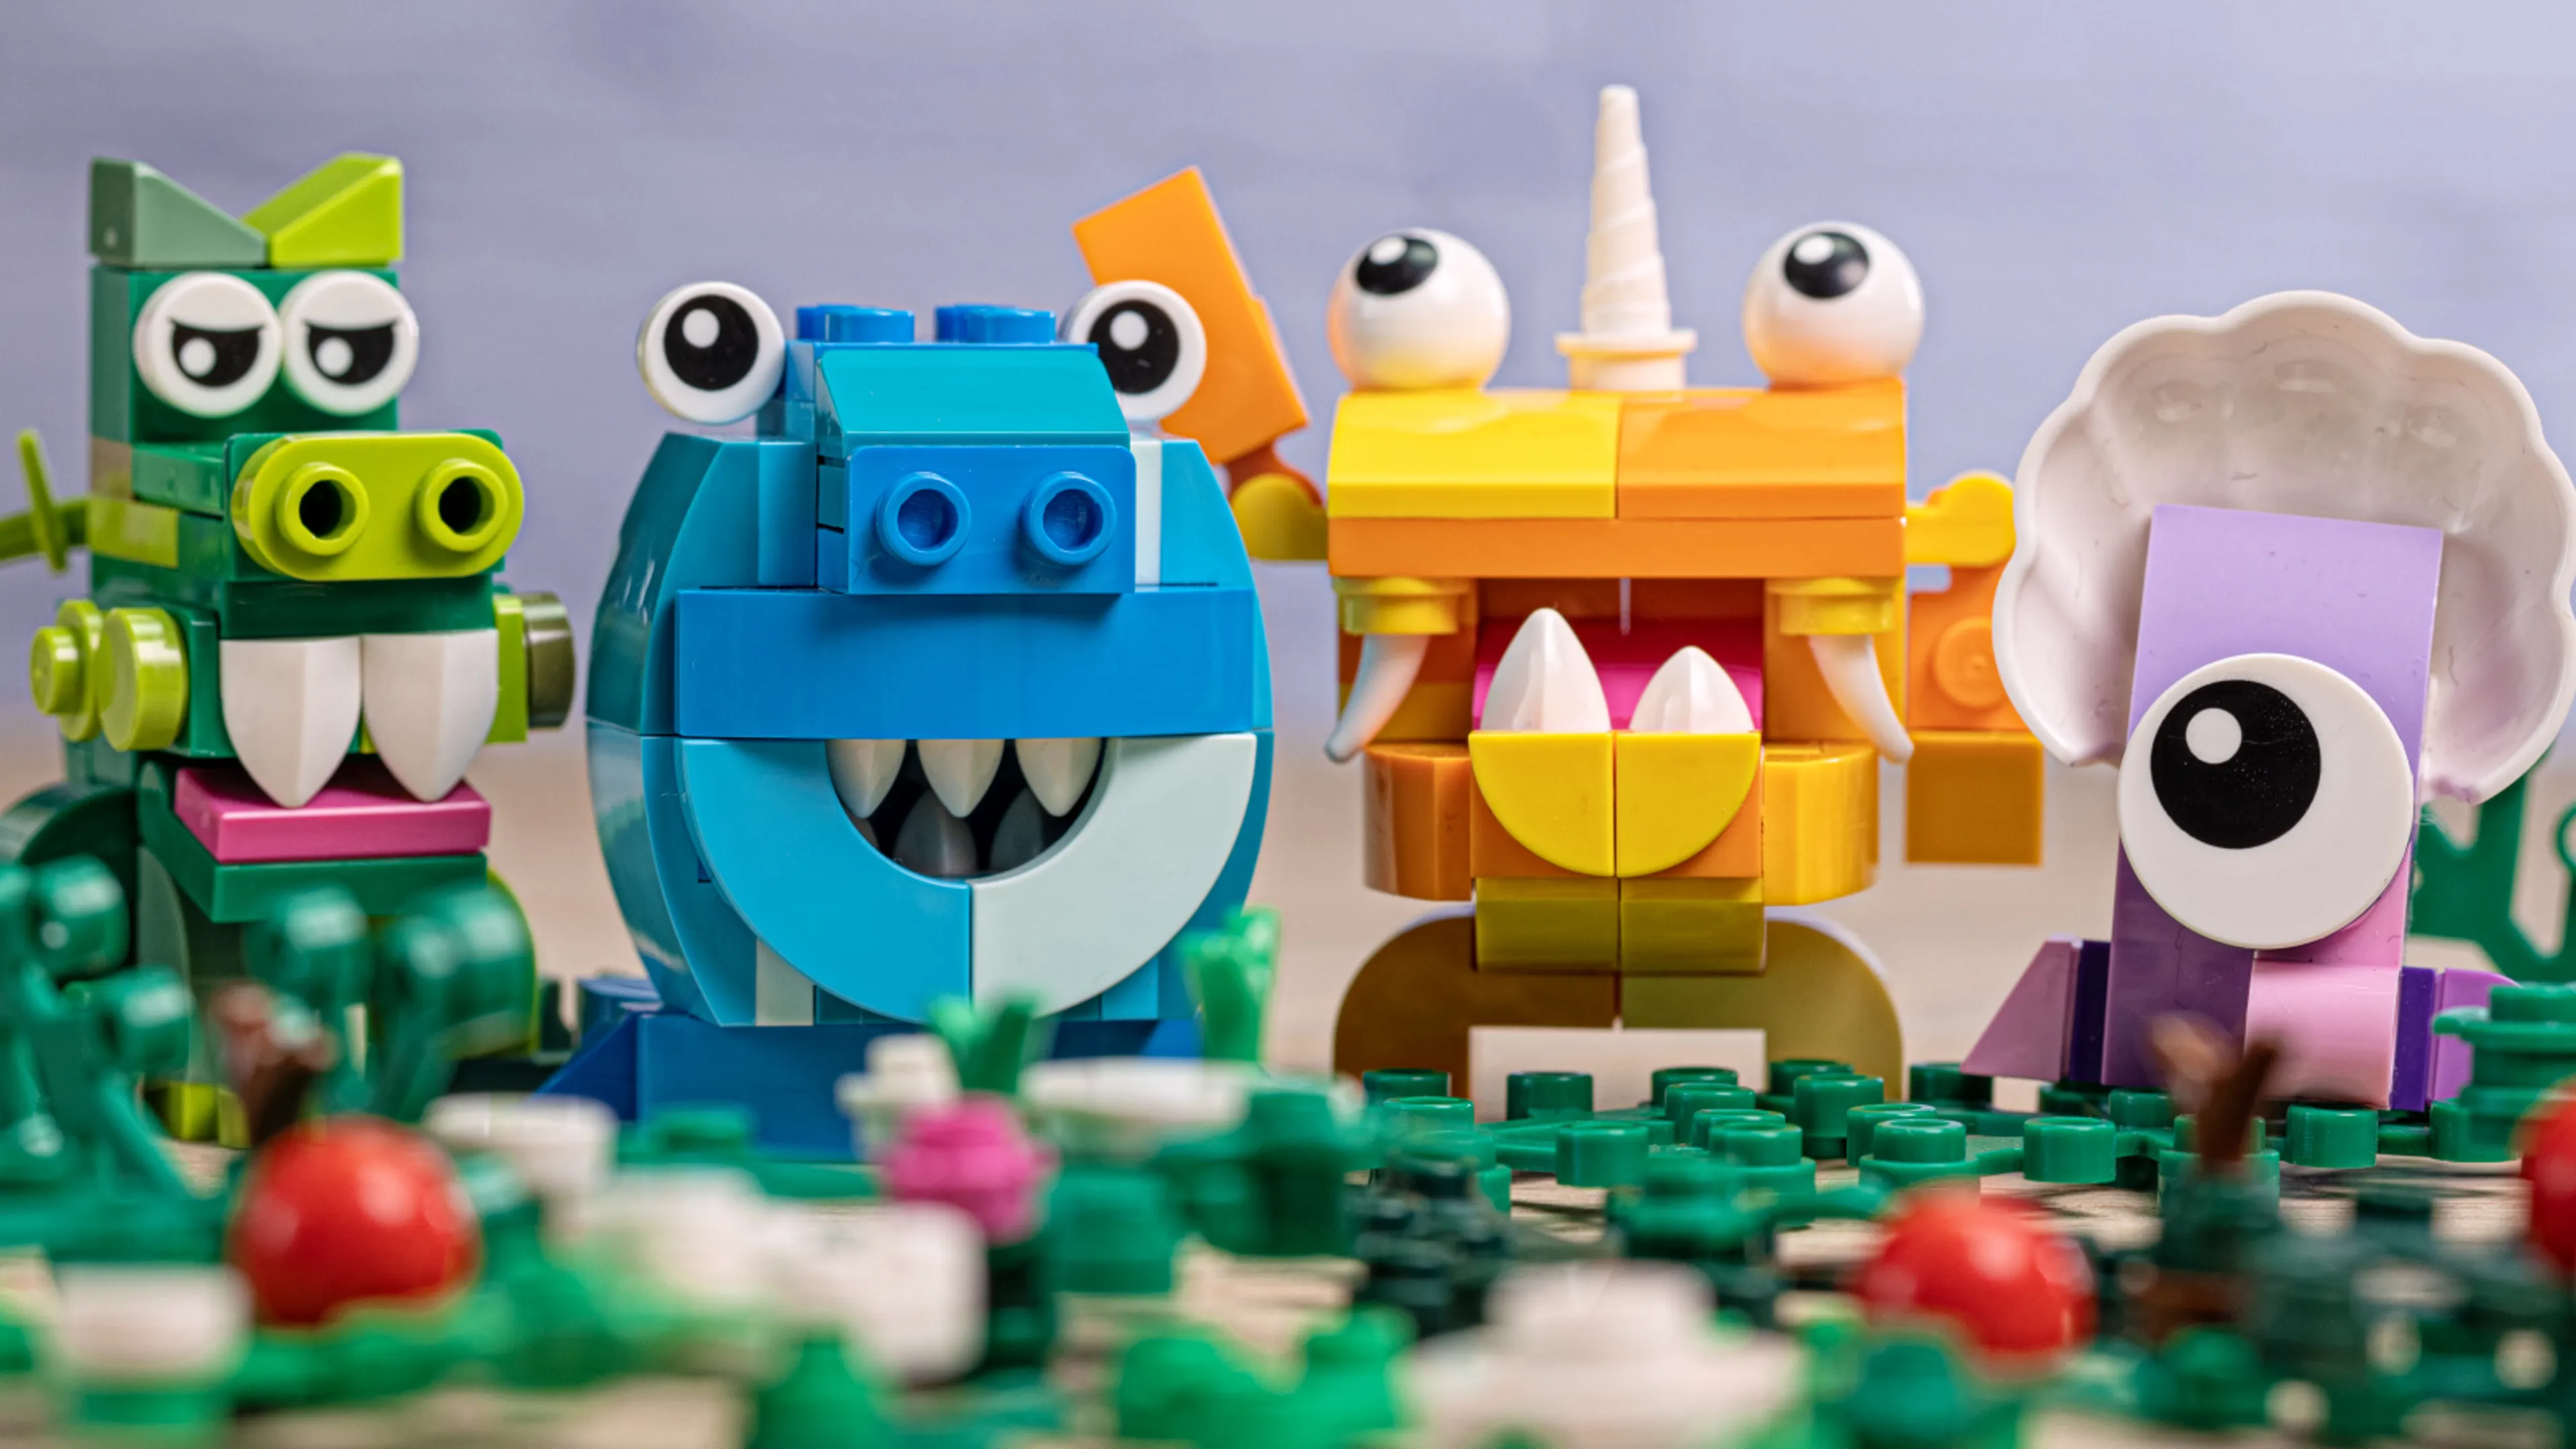 LEGO monsters